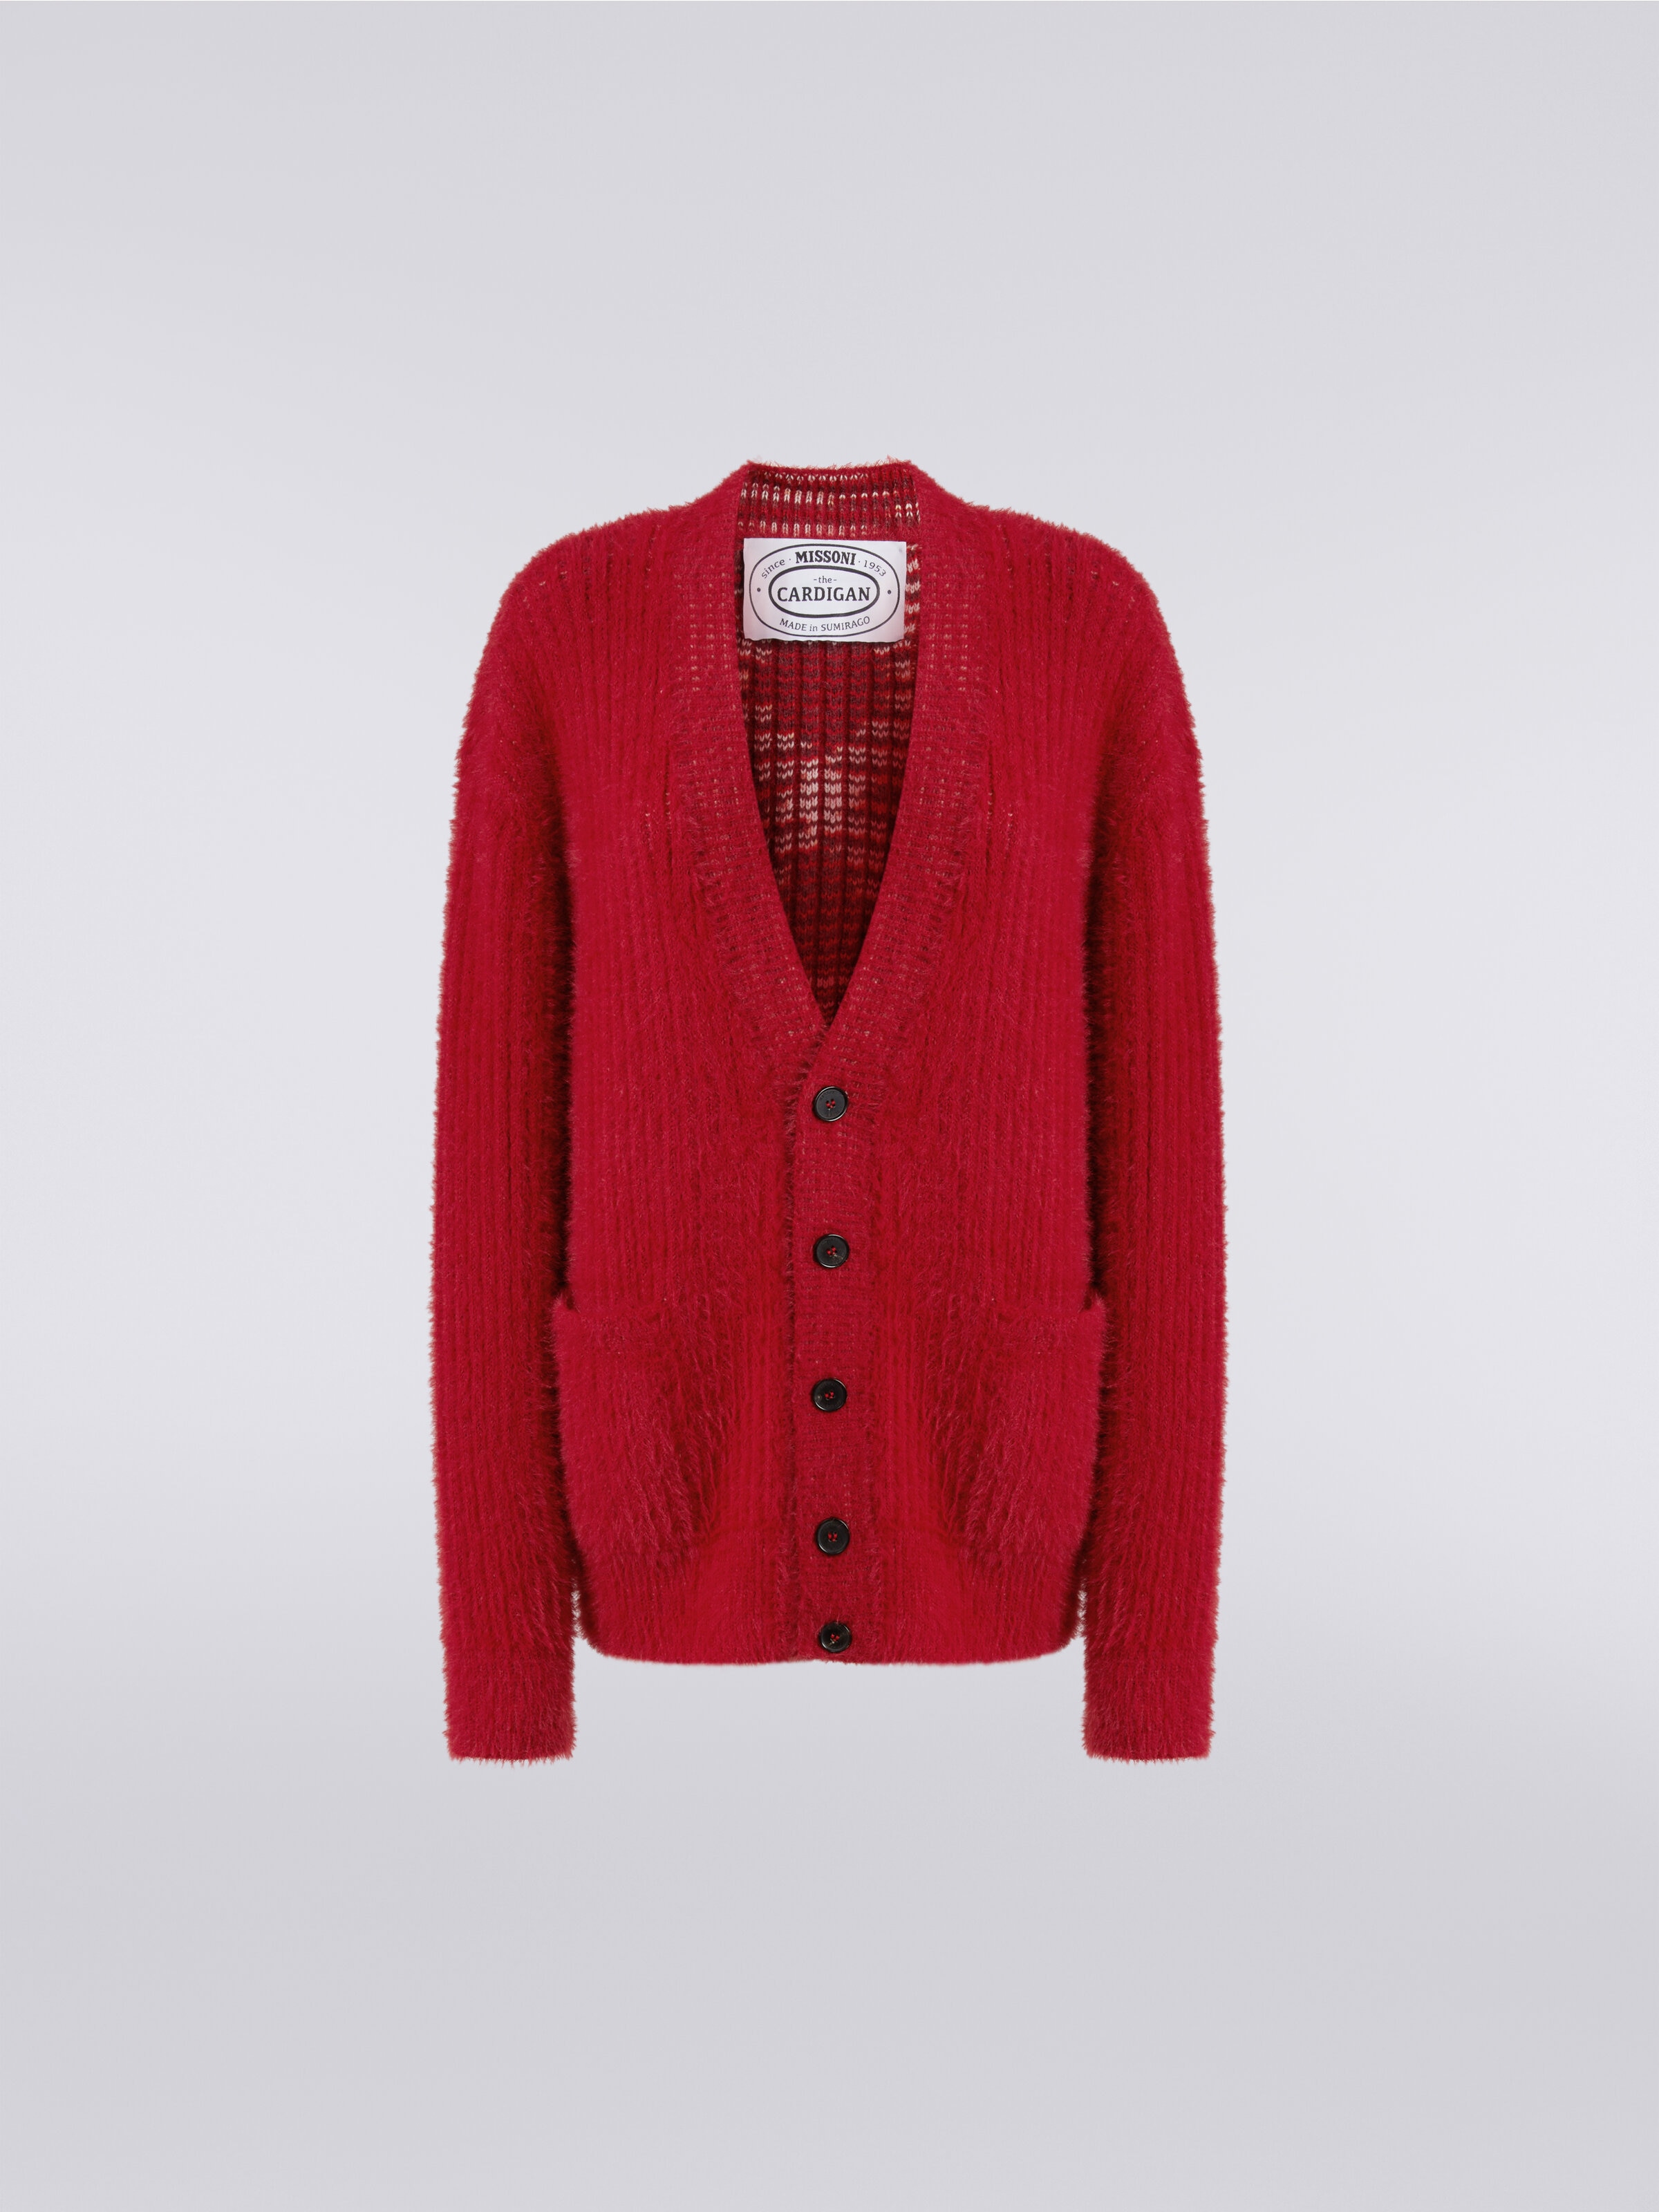 Oversized cardigan in fur-effect wool blend, Red  - 0